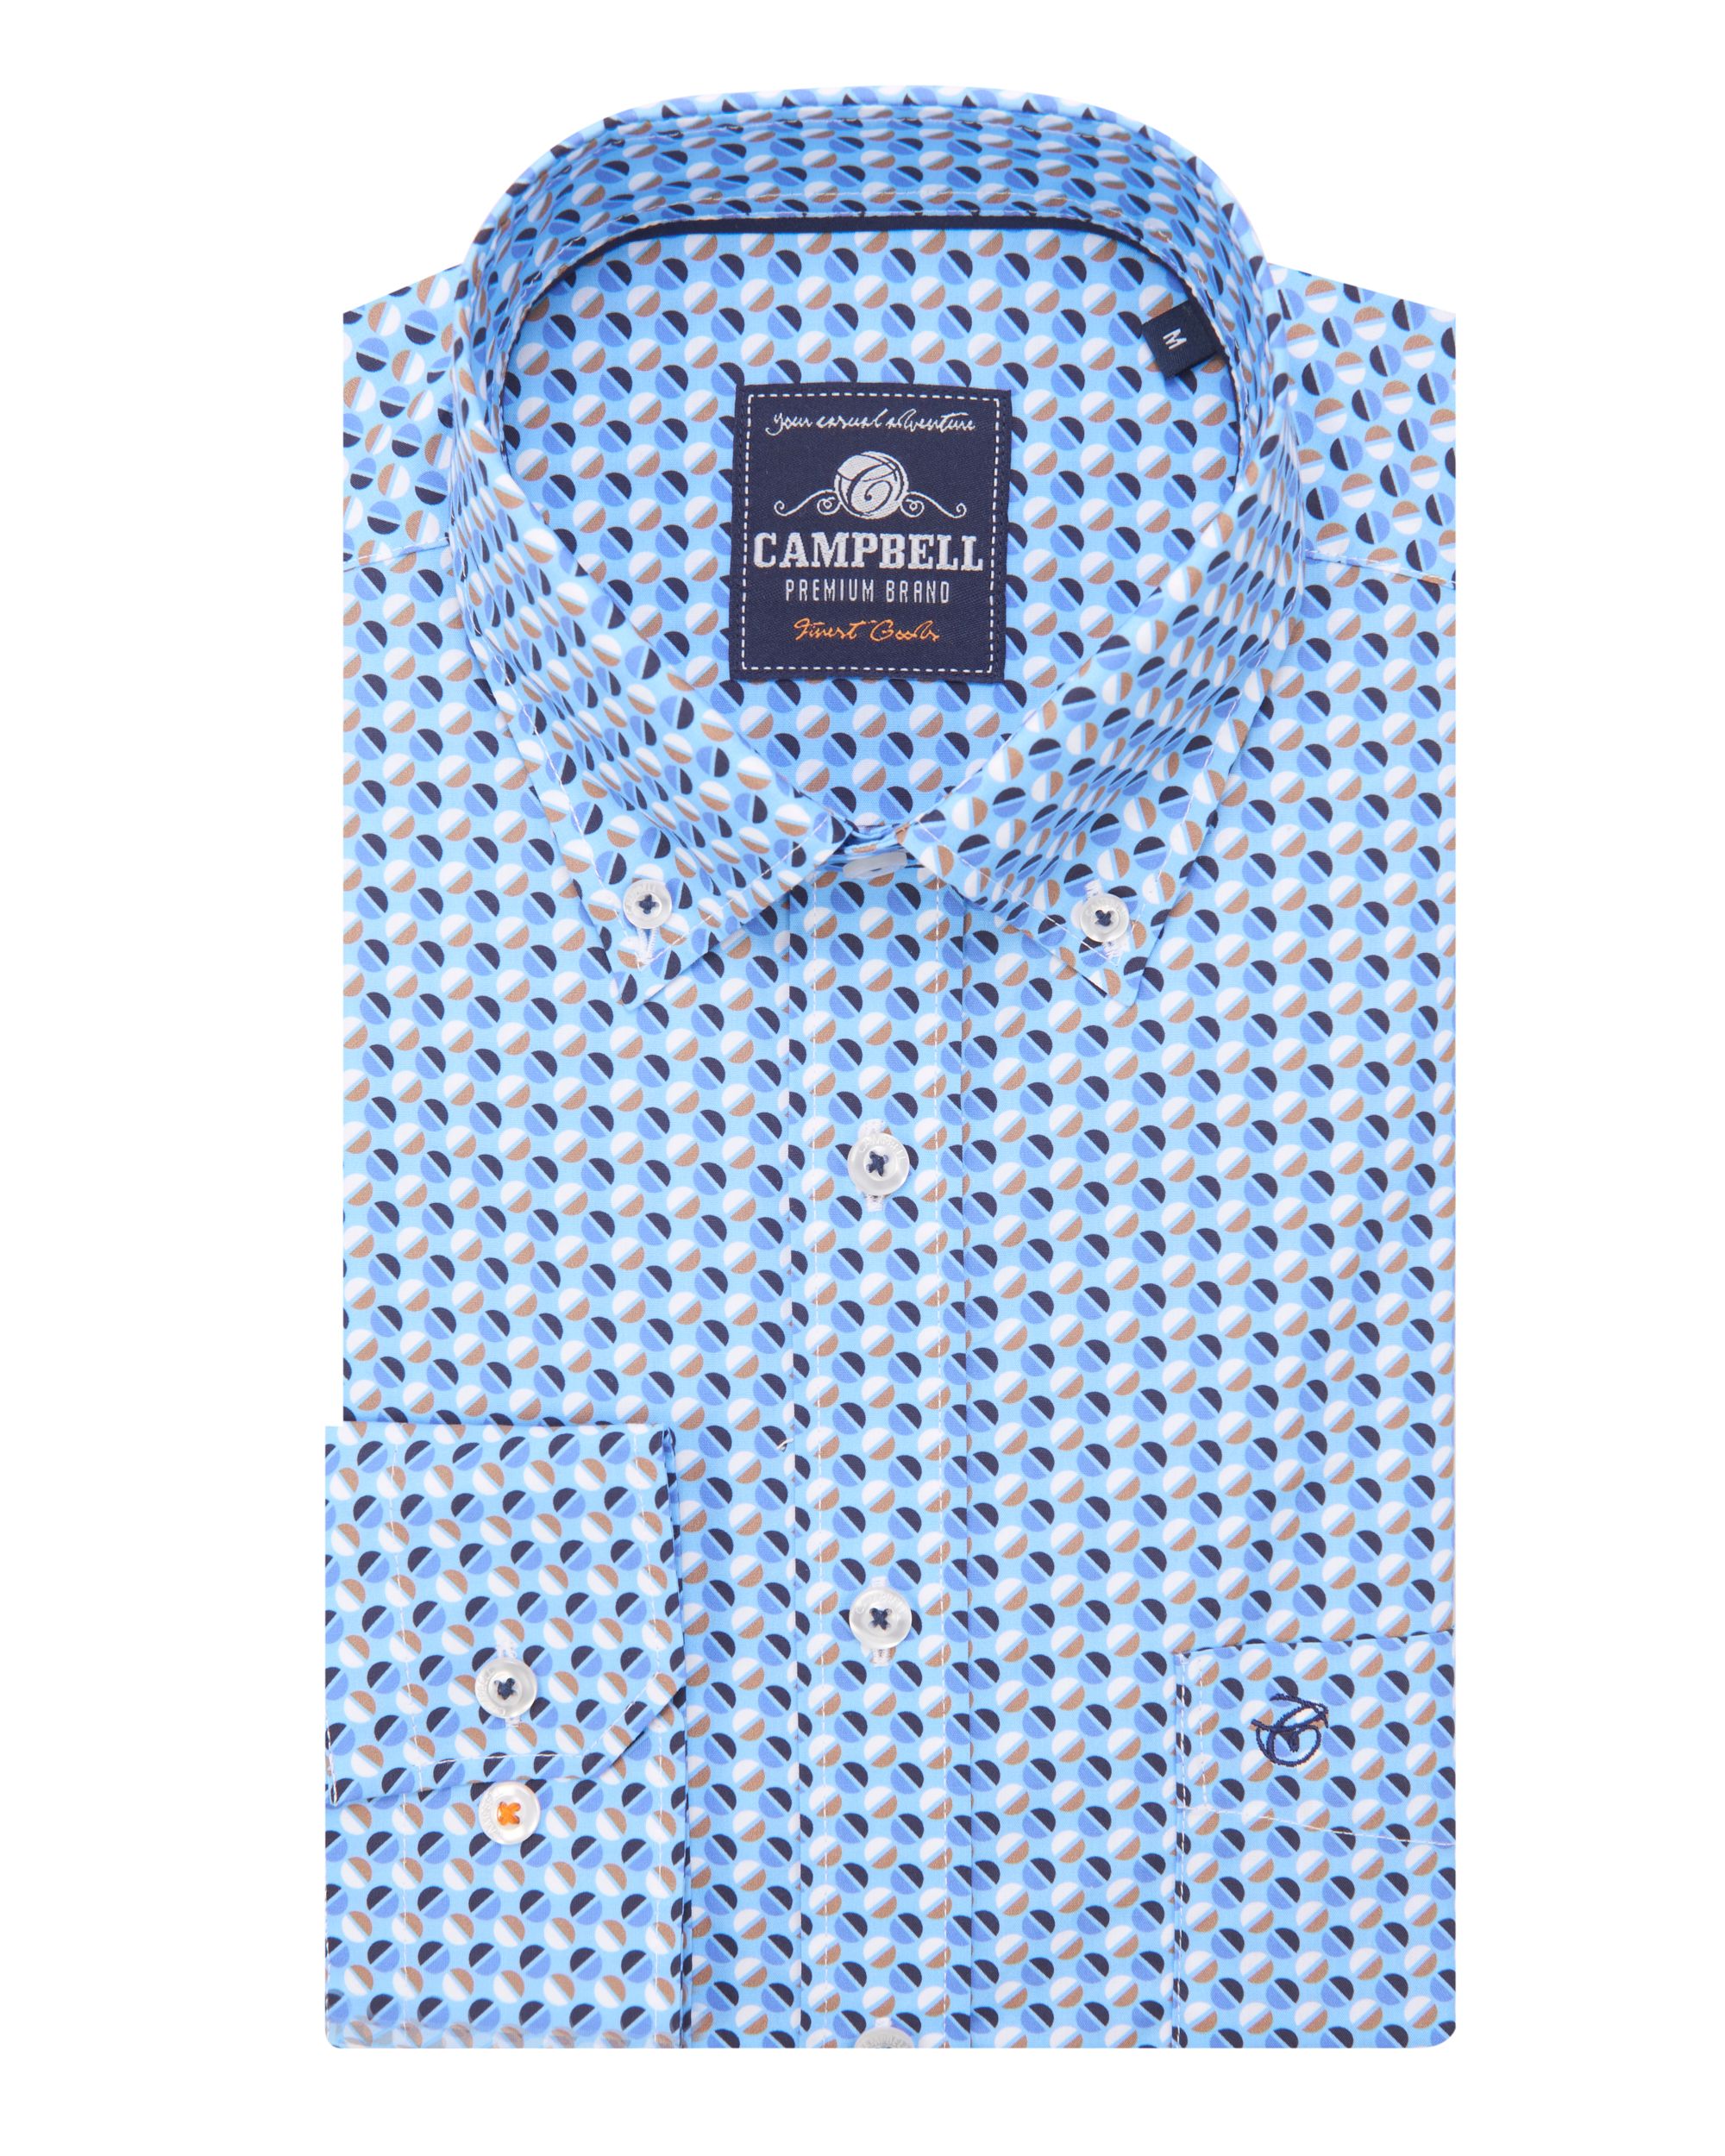 Campbell Classic Casual Overhemd LM Blauw dessin 084664-001-L